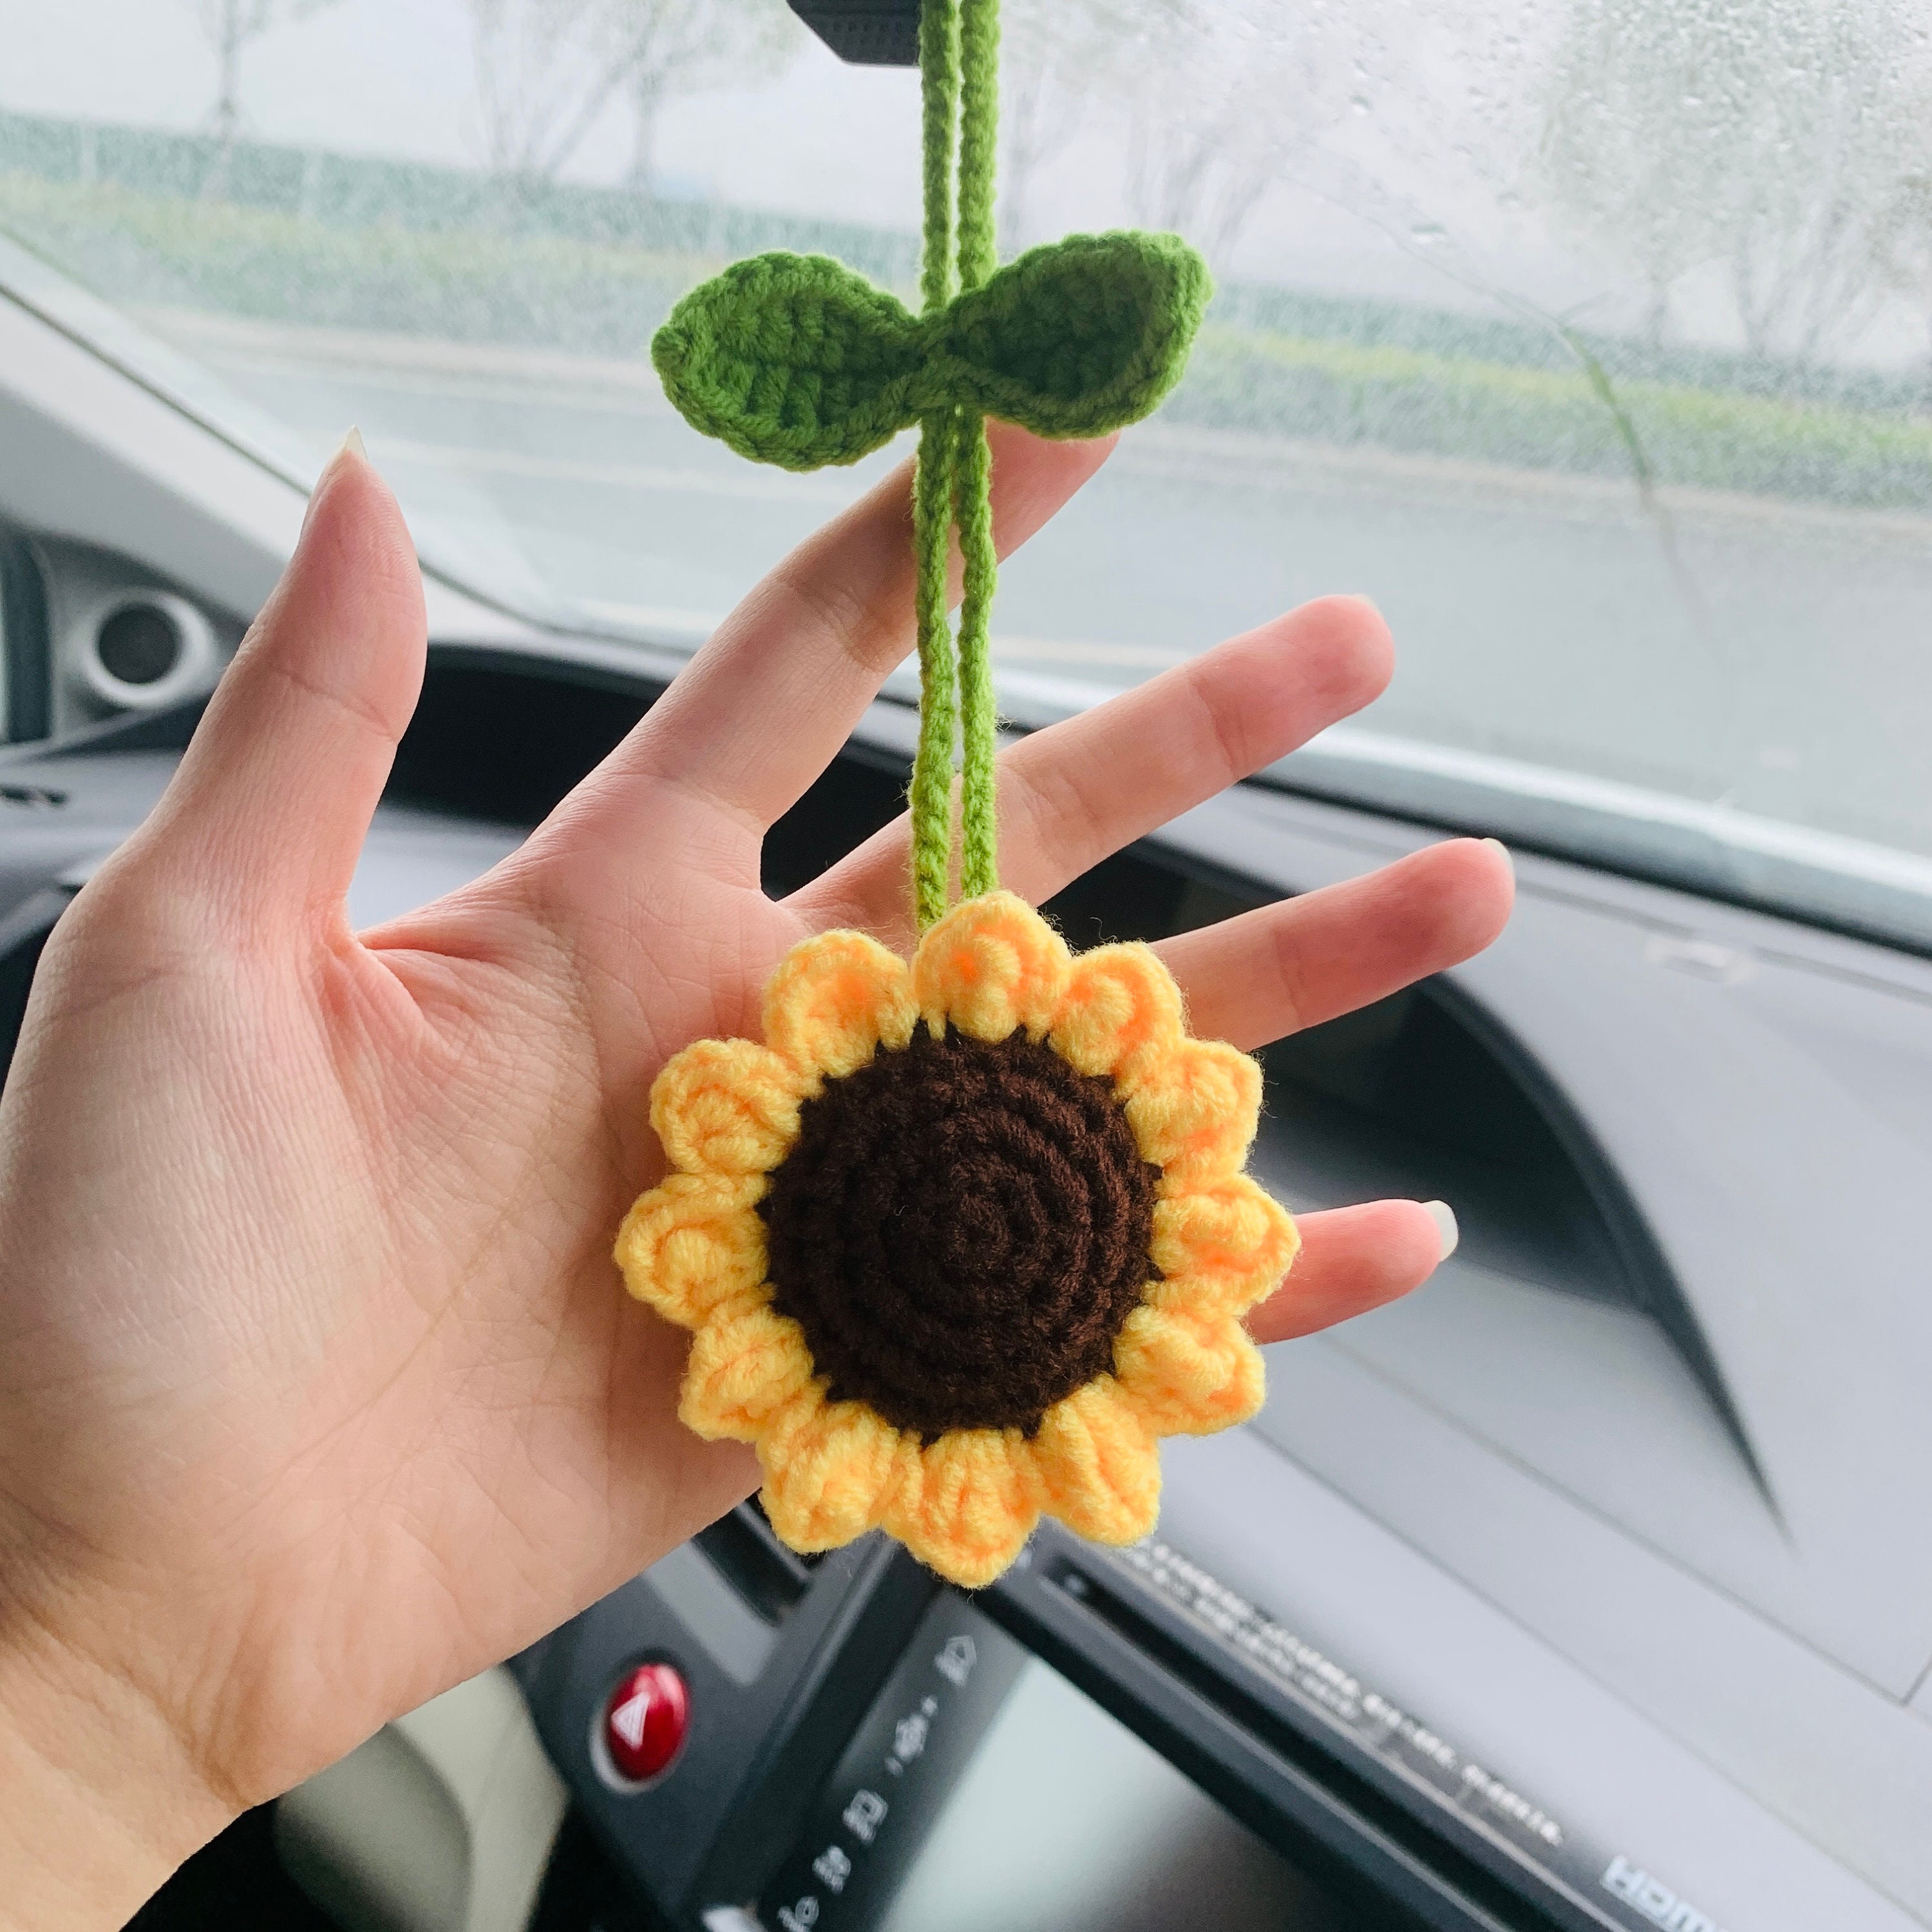 Car Mirror Hanging Accessories,Sunflower Rear View Mirror Hanging  Accessories,Crochet Car Accessories,Cute Car Decor,for Car  Cecorations,Backpack